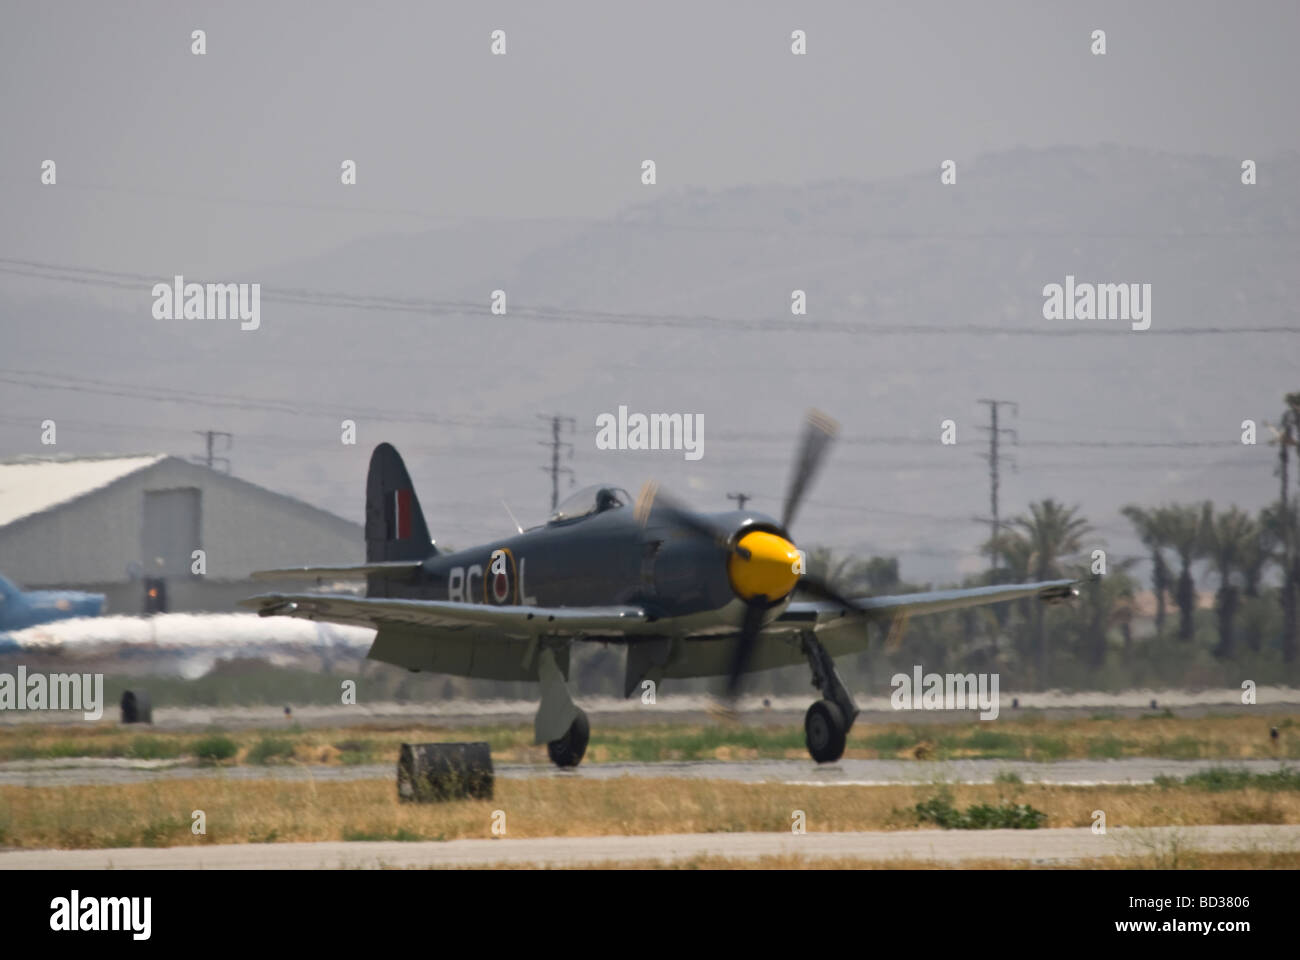 A Hawker Sea Fury touches down on the runway after flying at an air show. Stock Photo